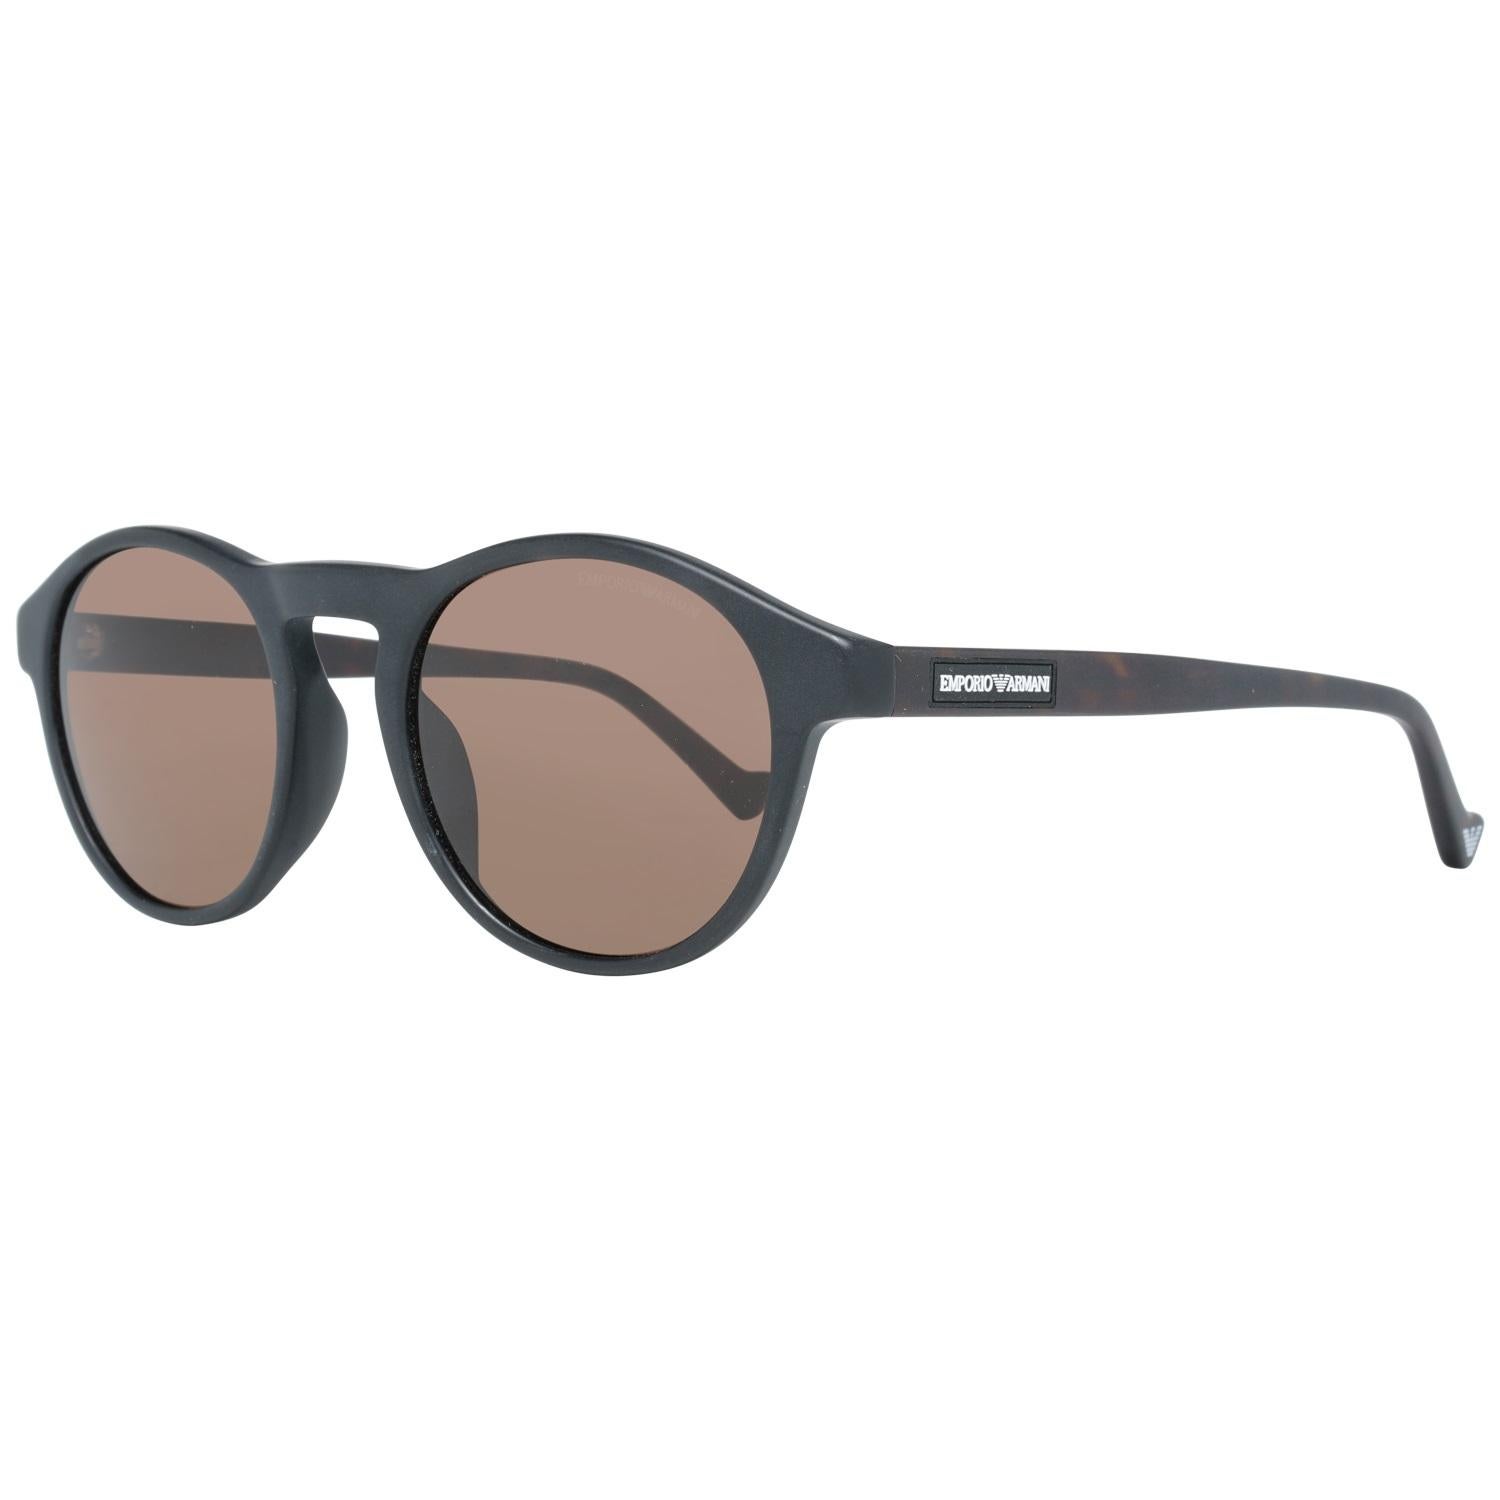 Details
MATERIAL: Acetate
COLOR: Black
MODEL: EA4138F 52501773
GENDER: Adult Unisex
COUNTRY OF MANUFACTURE: China
TYPE: Sunglasses
ORIGINAL CASE?: Yes
STYLE: Oval
OCCASION: Casual
FEATURES: Lightweight
LENS COLOR: Brown
LENS TECHNOLOGY: 
YEAR